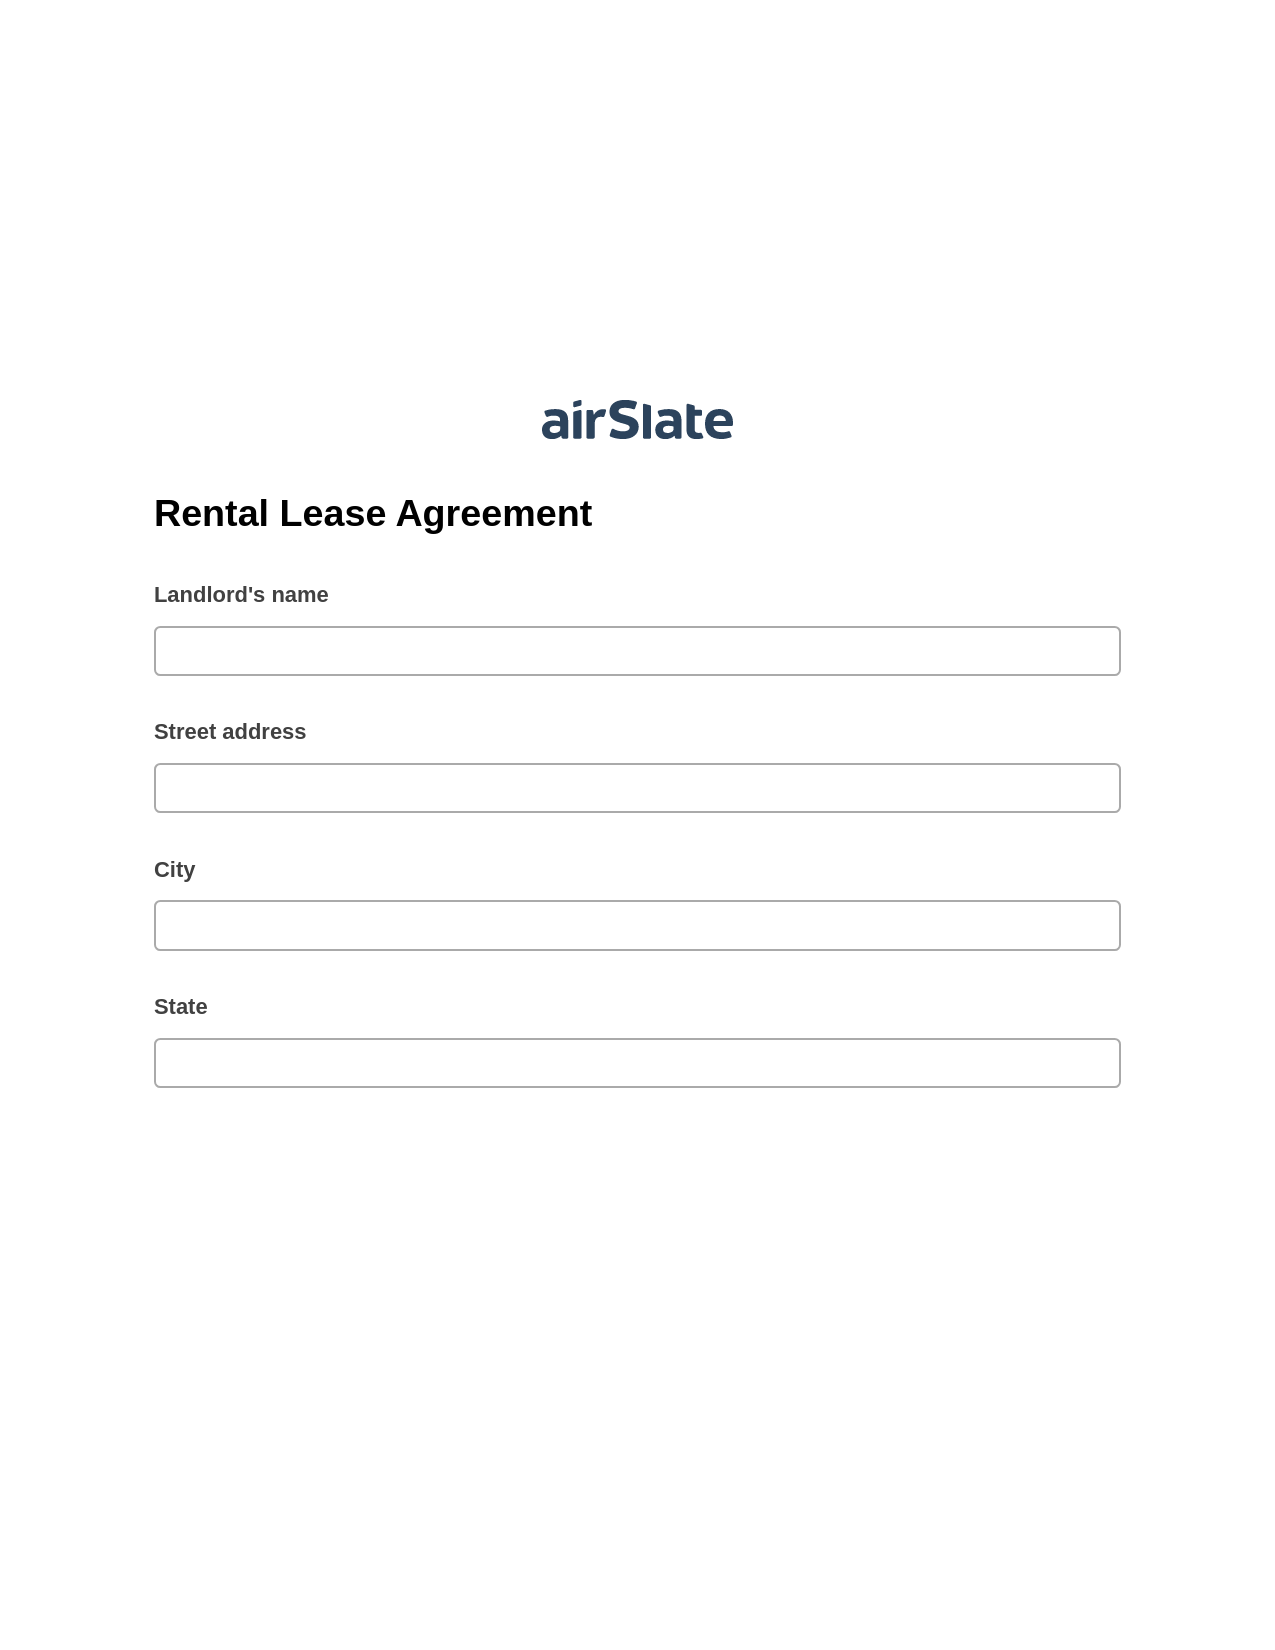 Rental Lease Agreement Pre-fill from Excel Spreadsheet Bot, Google Cloud Print Bot, OneDrive Bot